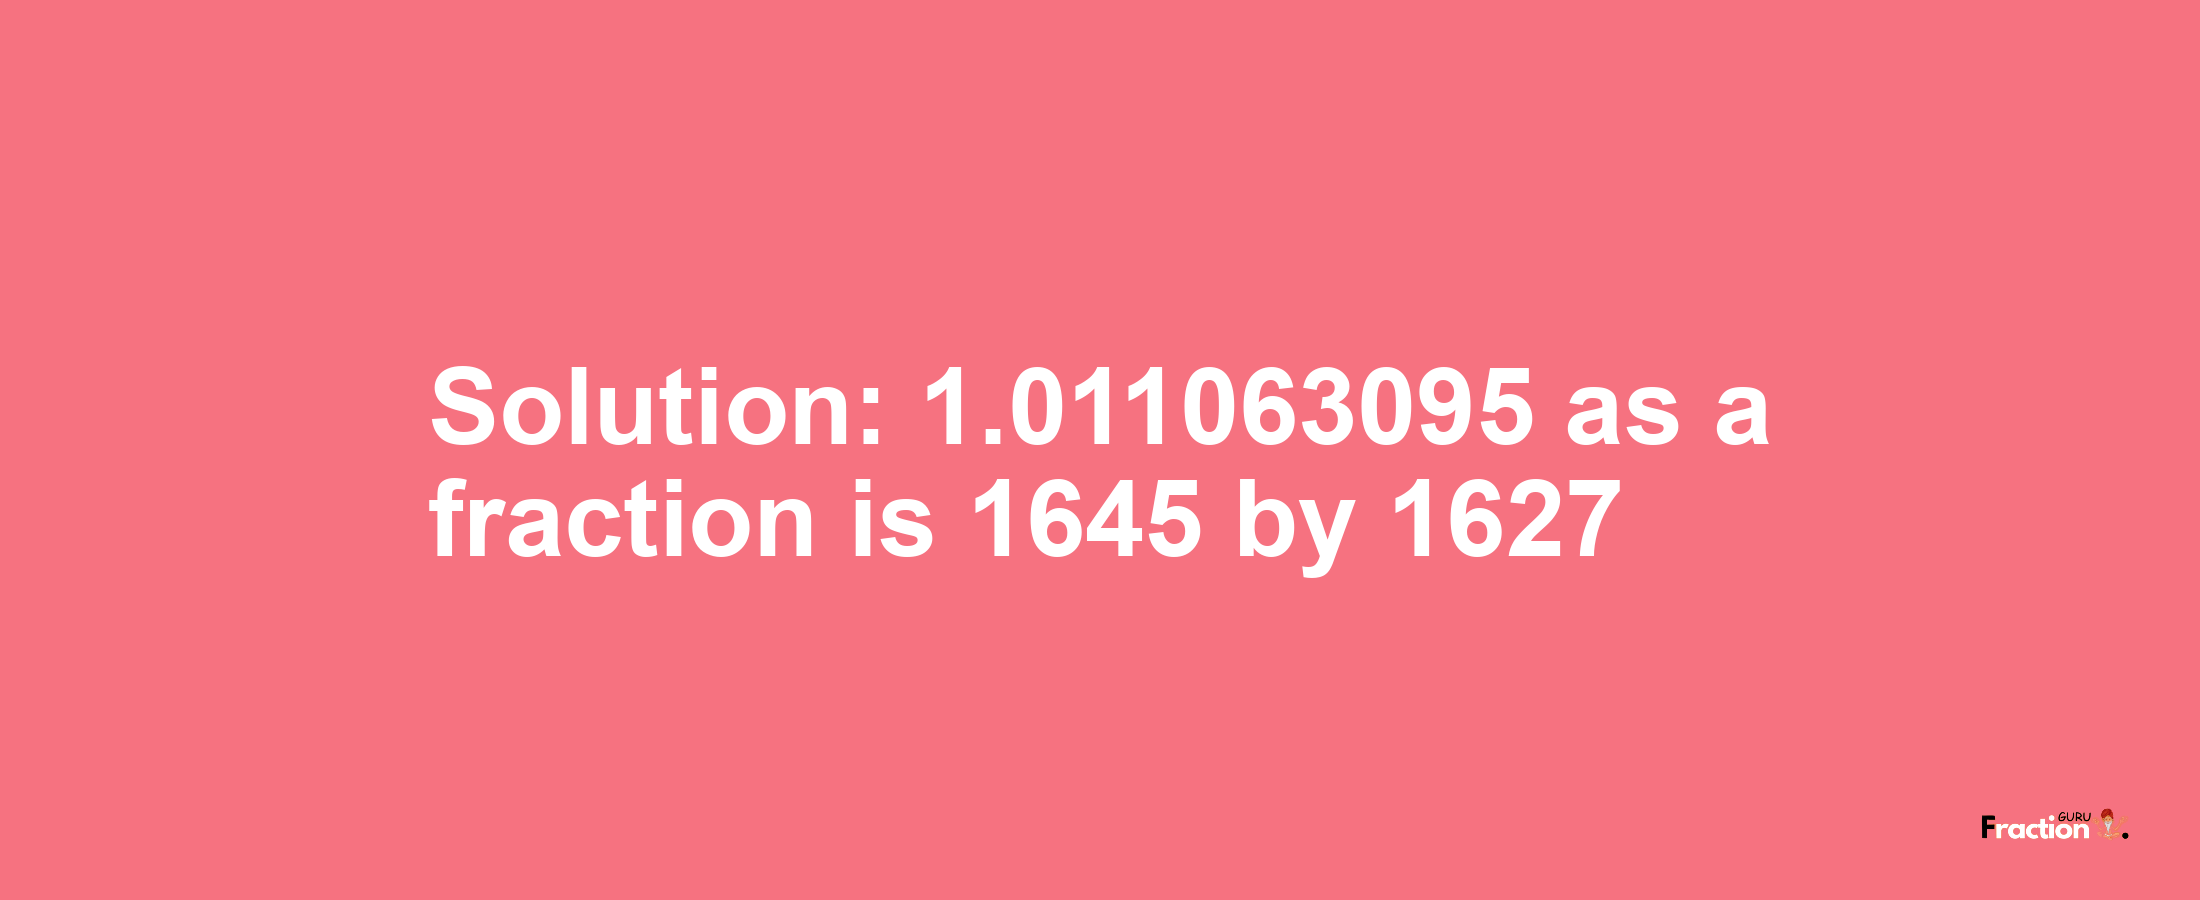 Solution:1.011063095 as a fraction is 1645/1627